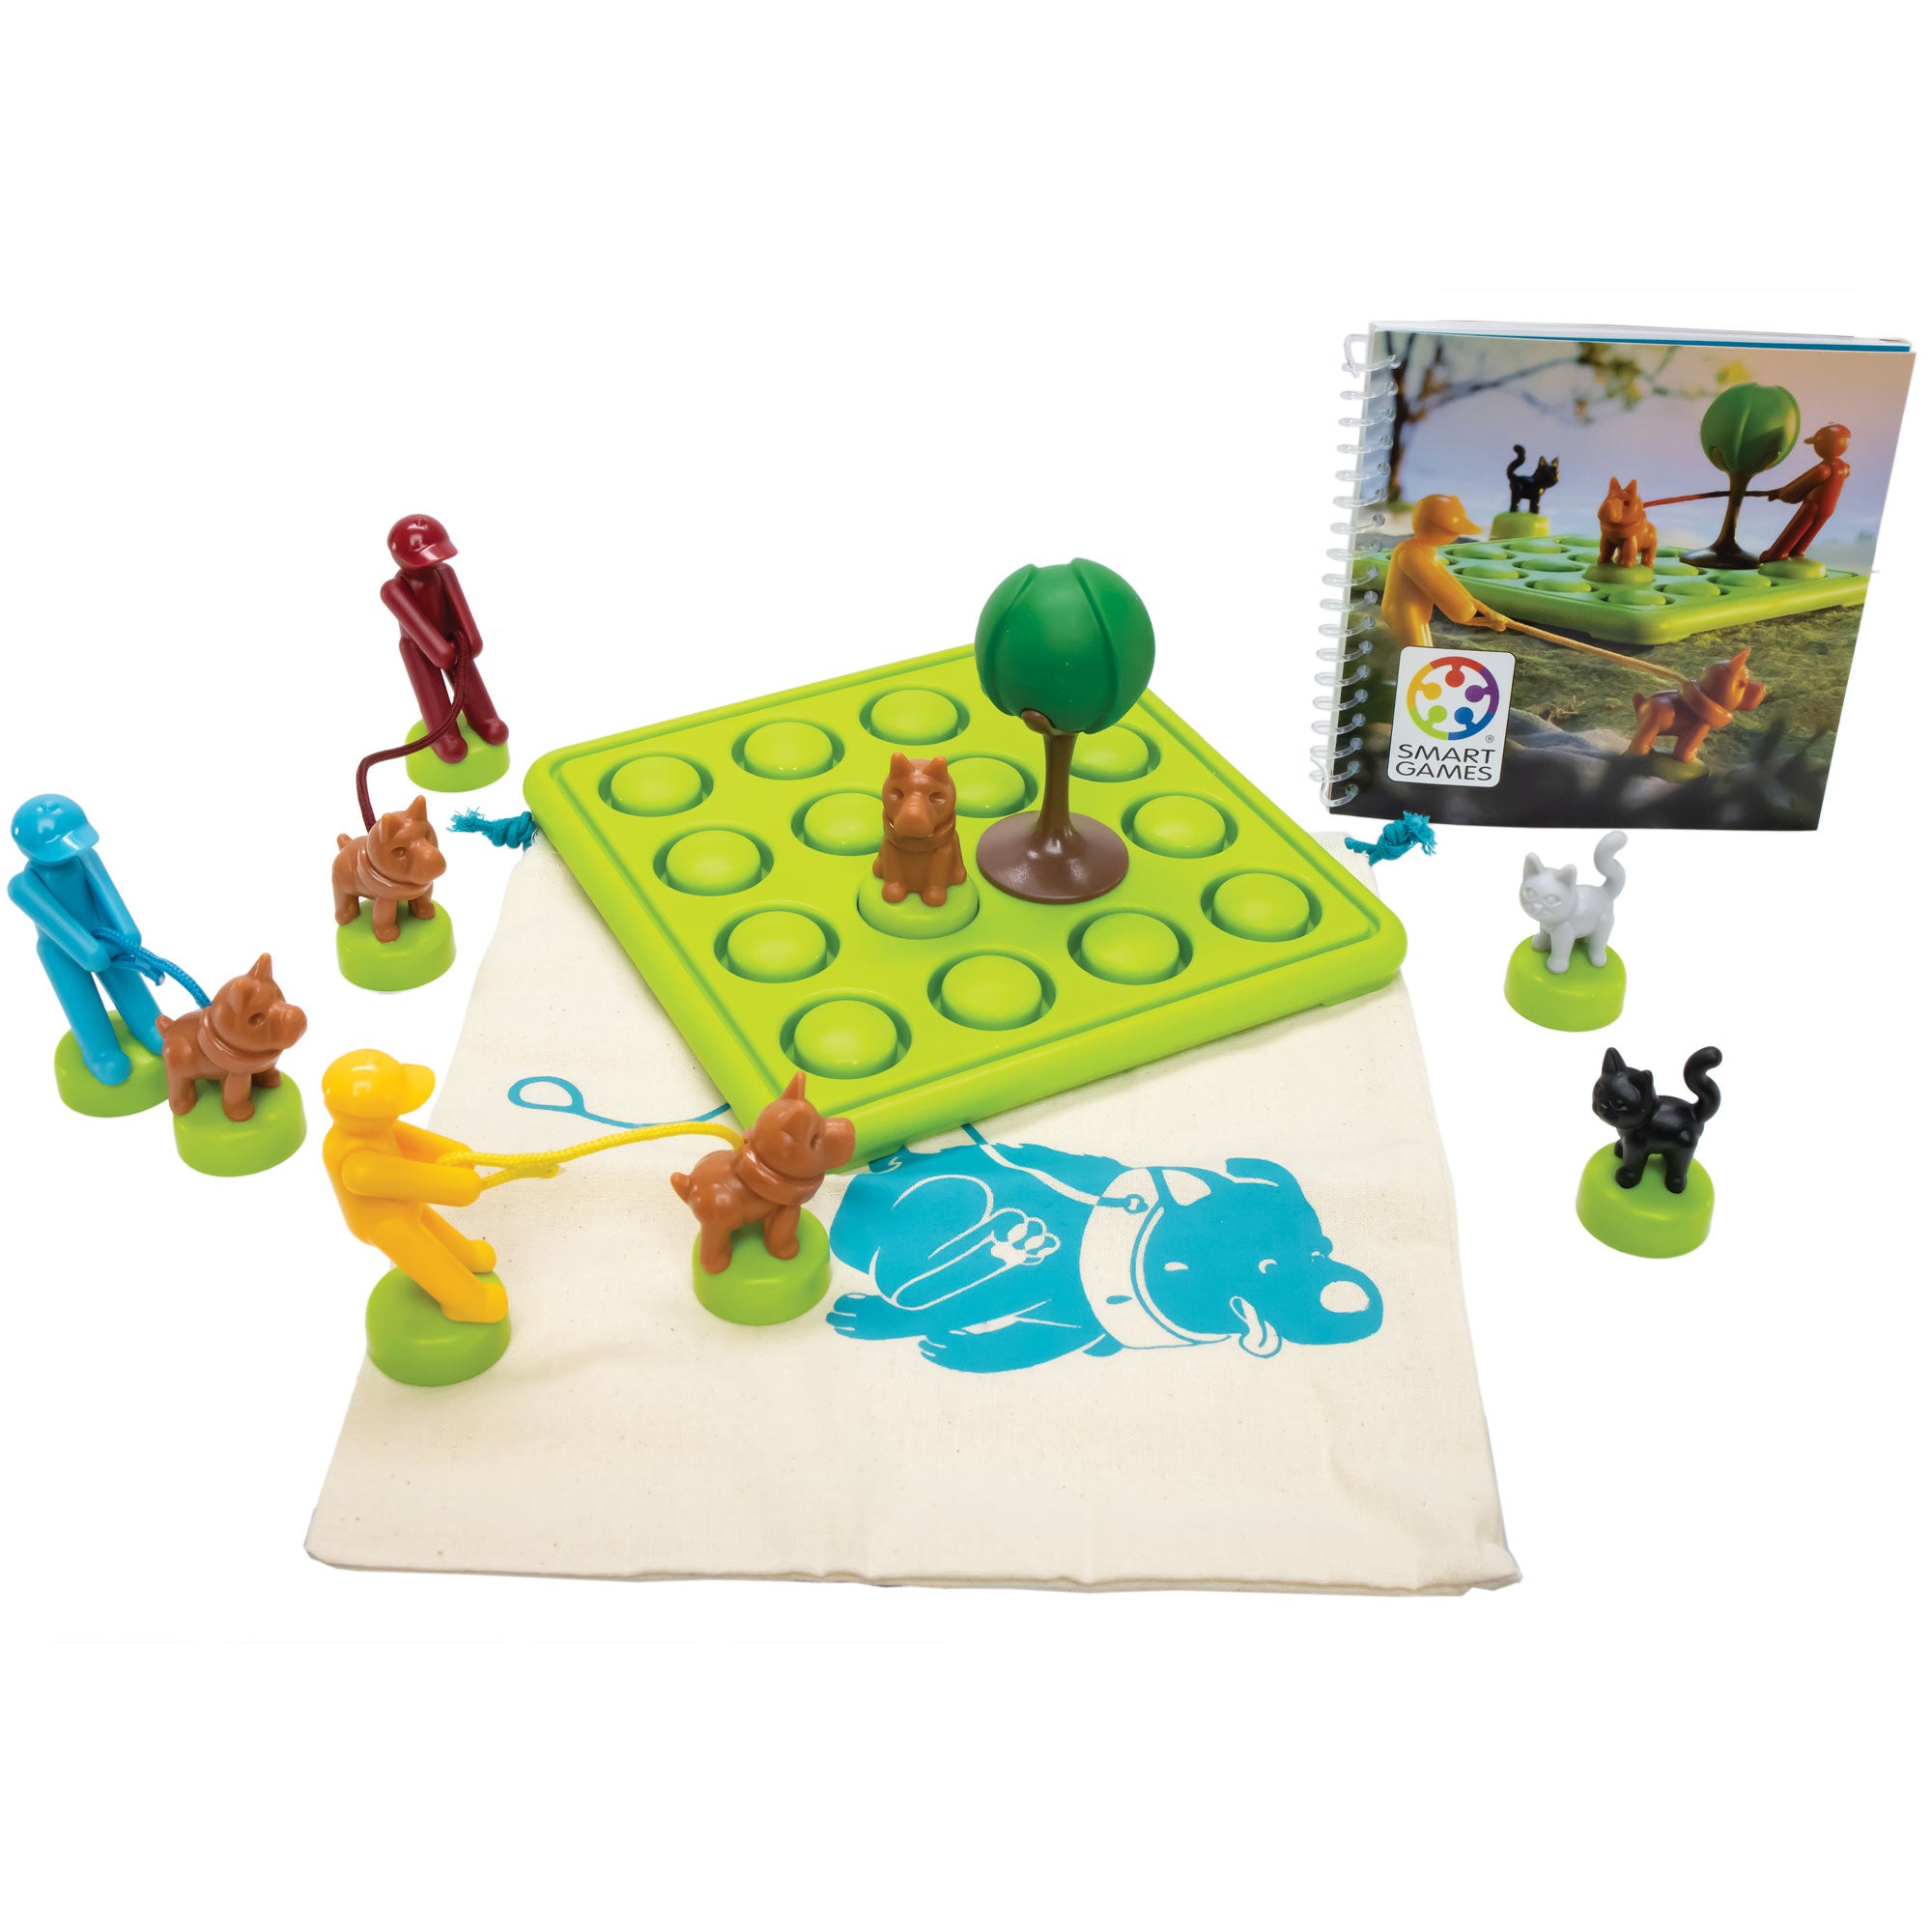 The Walk the Dog Smart Game contents laid out. The square game board is bright green with a grid of 4 by 4 circles that allow pieces to be placed on top. The pieces on top are colorful men with leashes attached to a dog, cats, and a tree piece. The game board is on top of a canvas bag. There is a spiral-bound game booklet in the upper-right with a picture of the game in play on the cover.